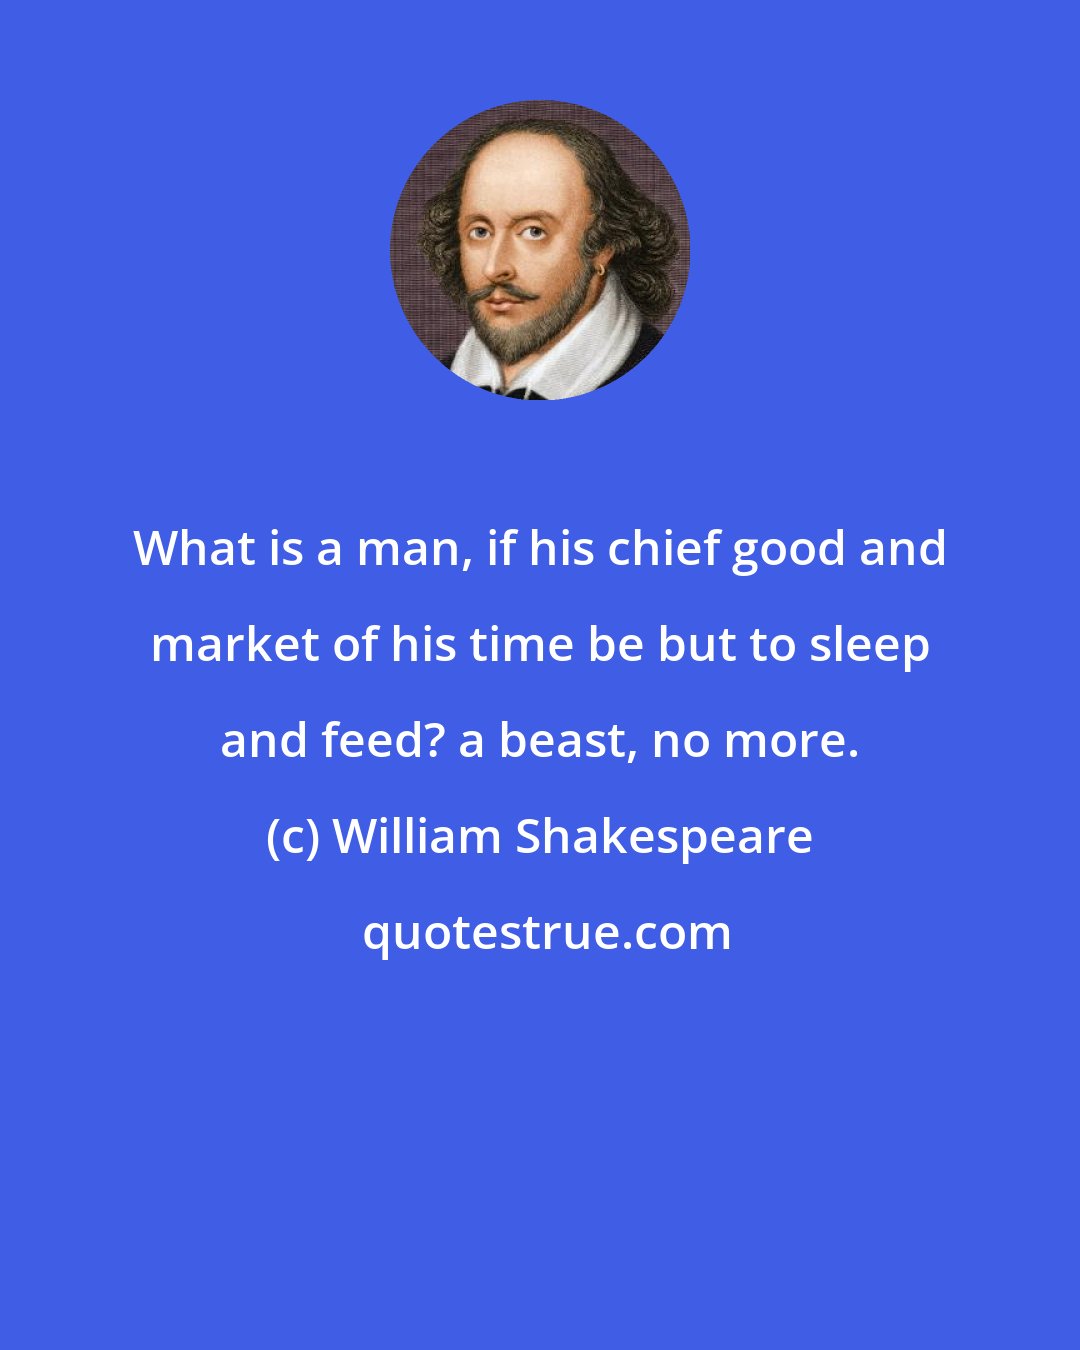 William Shakespeare: What is a man, if his chief good and market of his time be but to sleep and feed? a beast, no more.